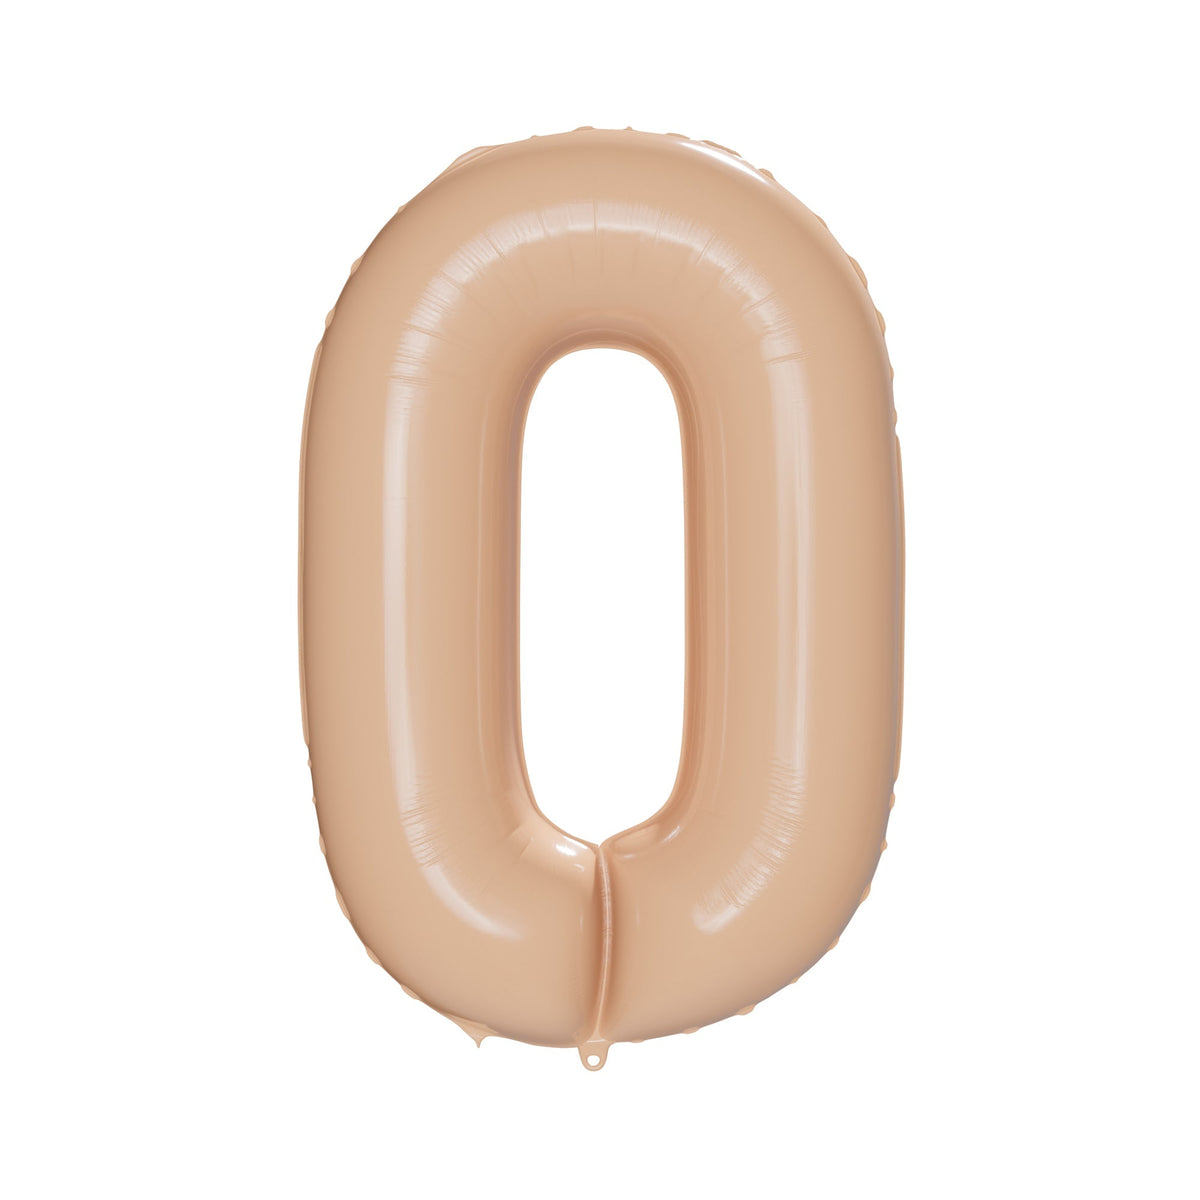 PARTYGRAM Balloons Cappuccino Number 0 Foil Balloon, Creamy Beige Matte Finish, 34 Inches, 1 Count 810077658345